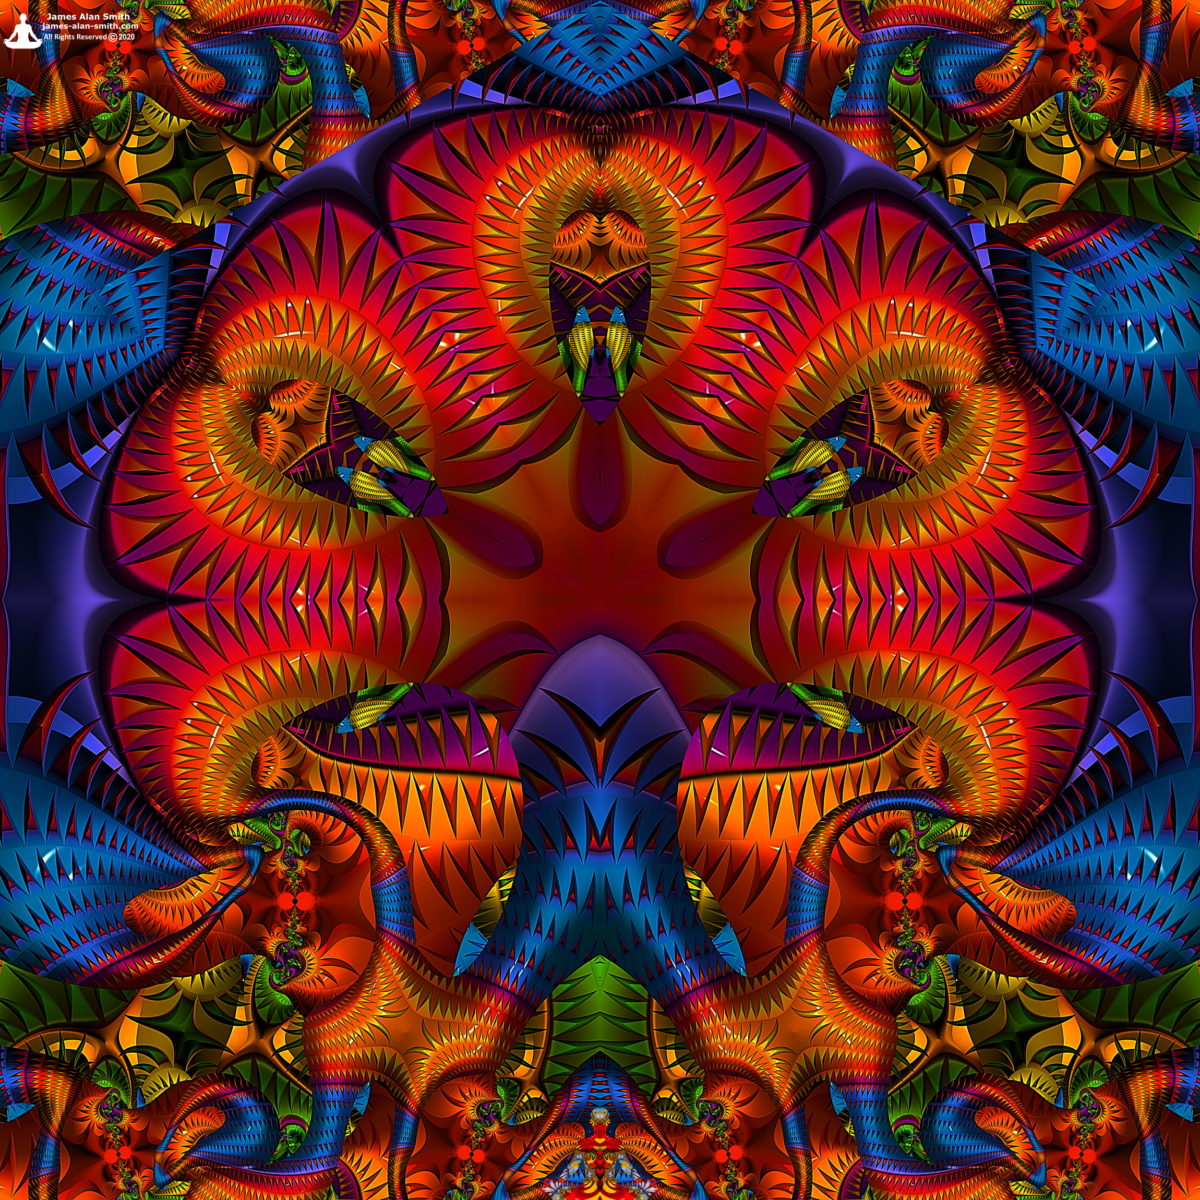 Sacred Abstractions: Artwork by James Alan Smith